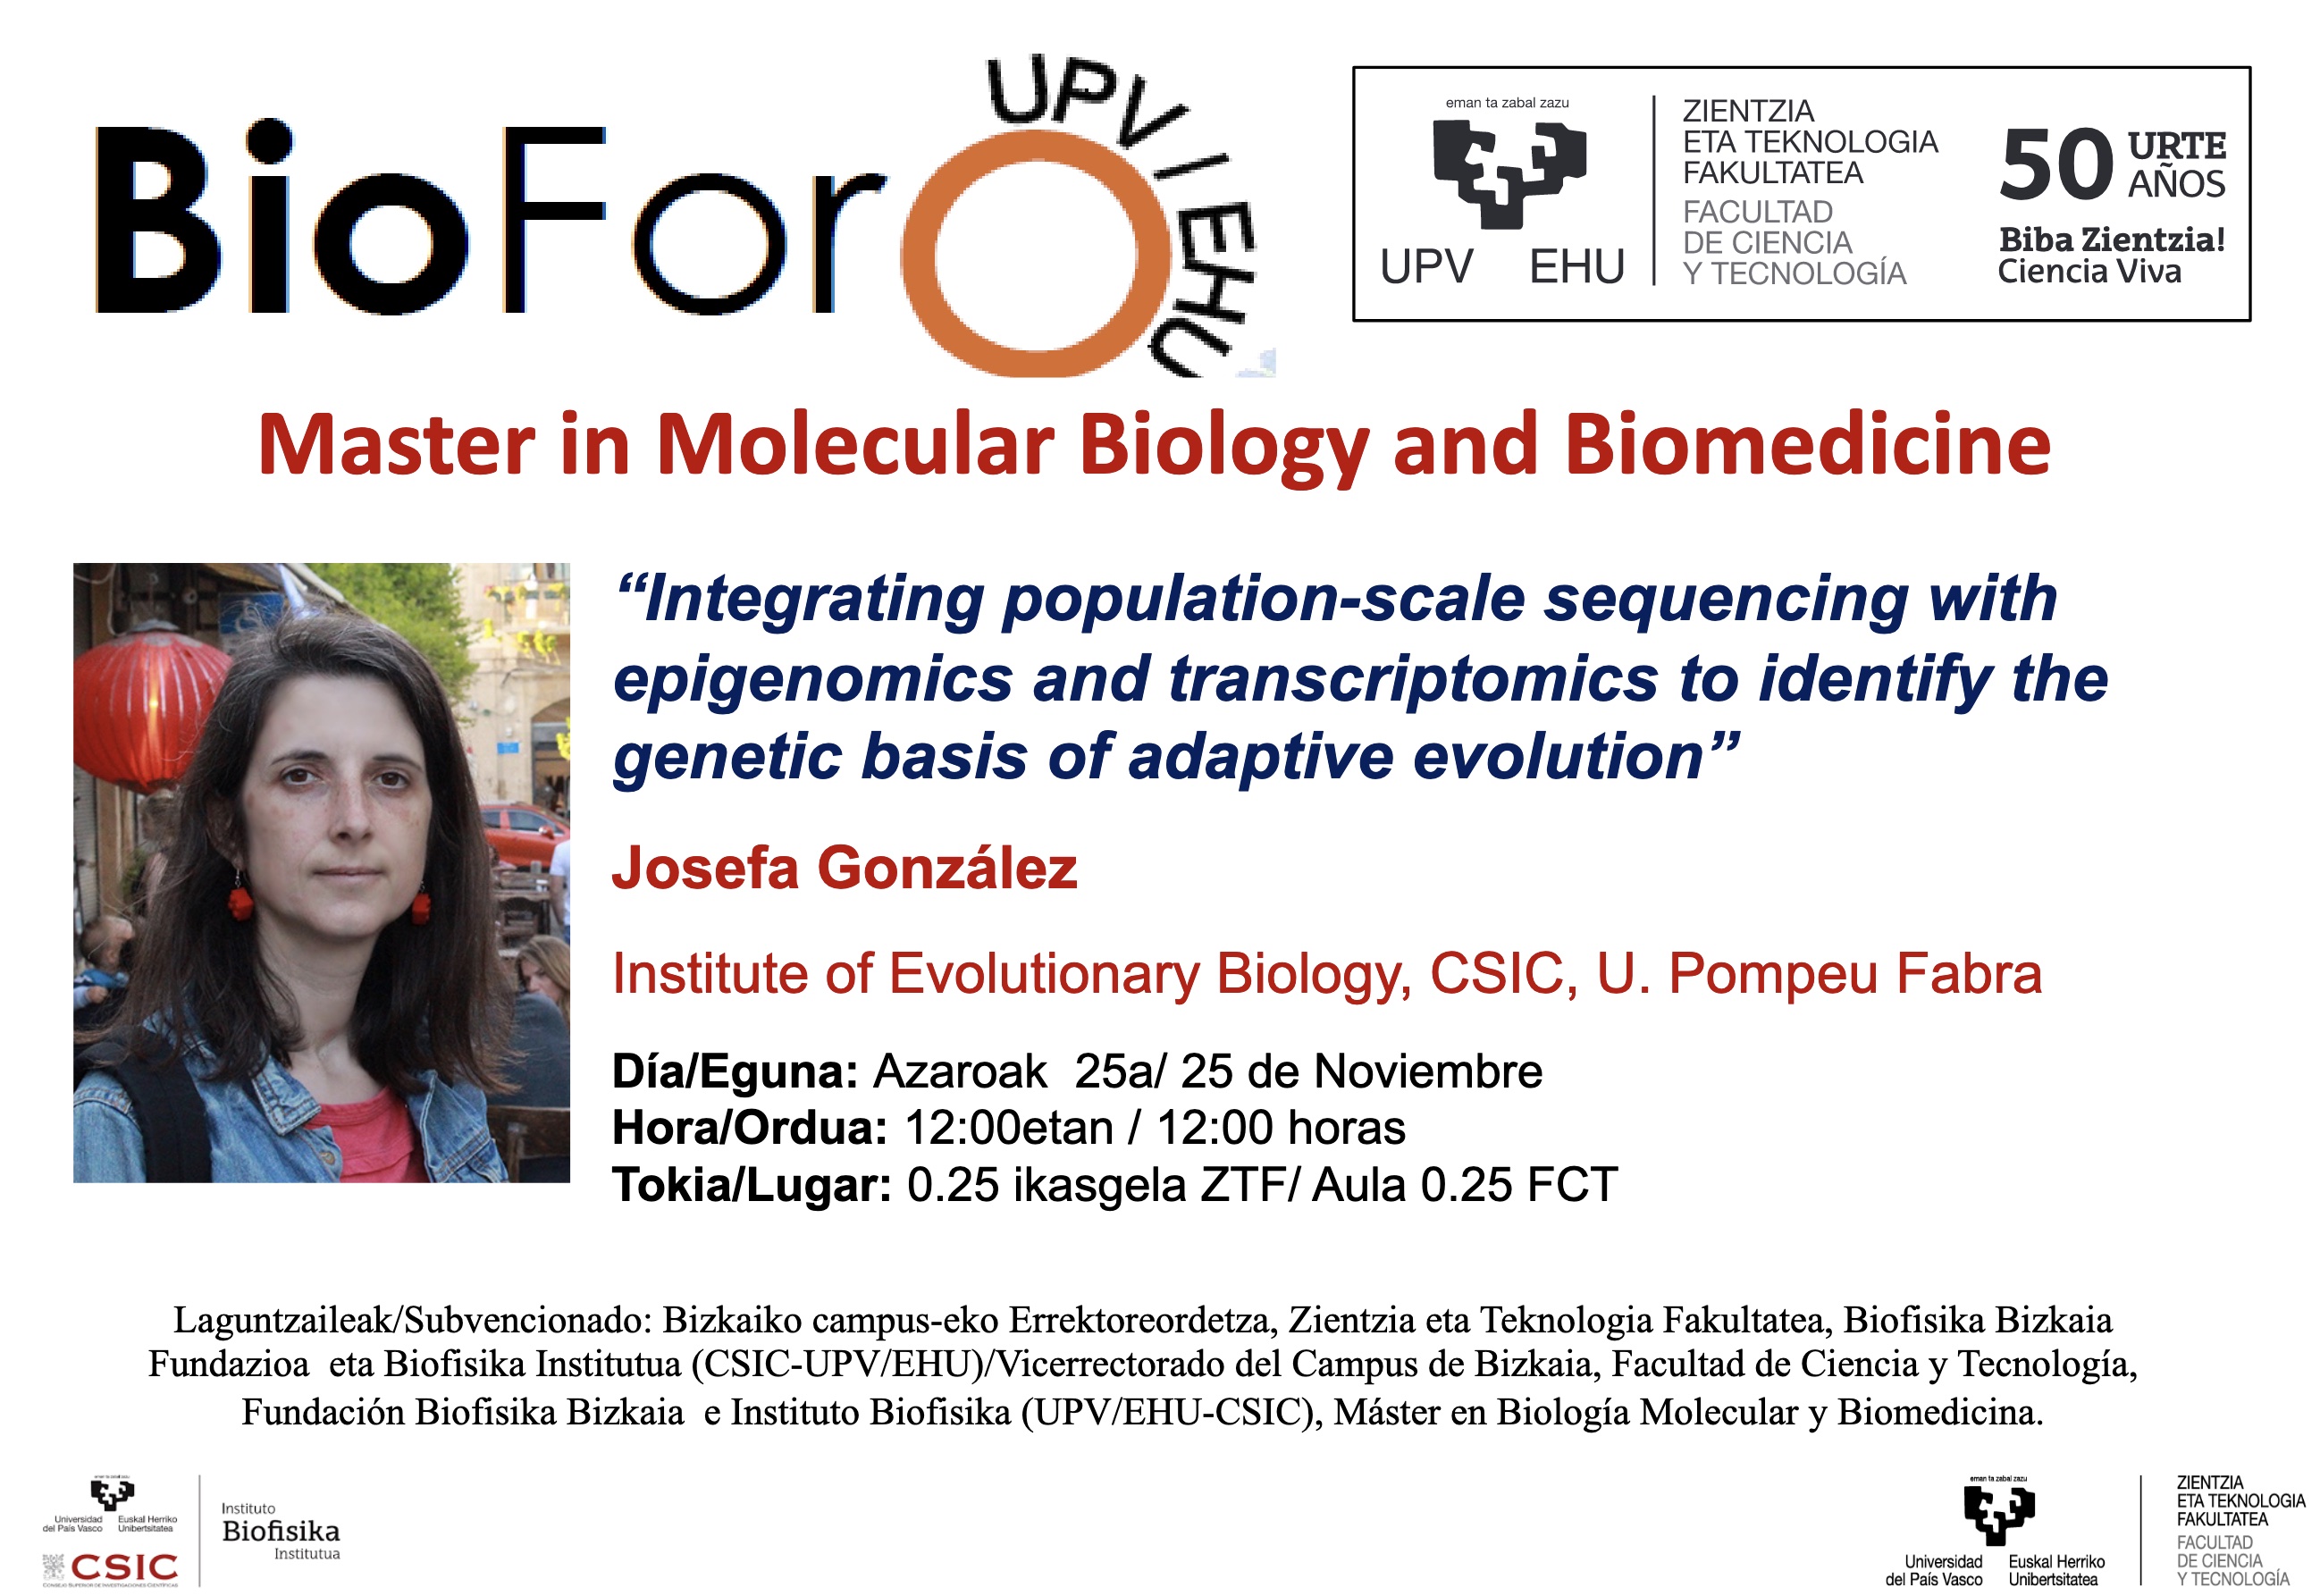 BioForo seminar: "Integrating population-scale sequencing with epigenomics and transcriptomics to identify the genetic basis of adaptive evolution"